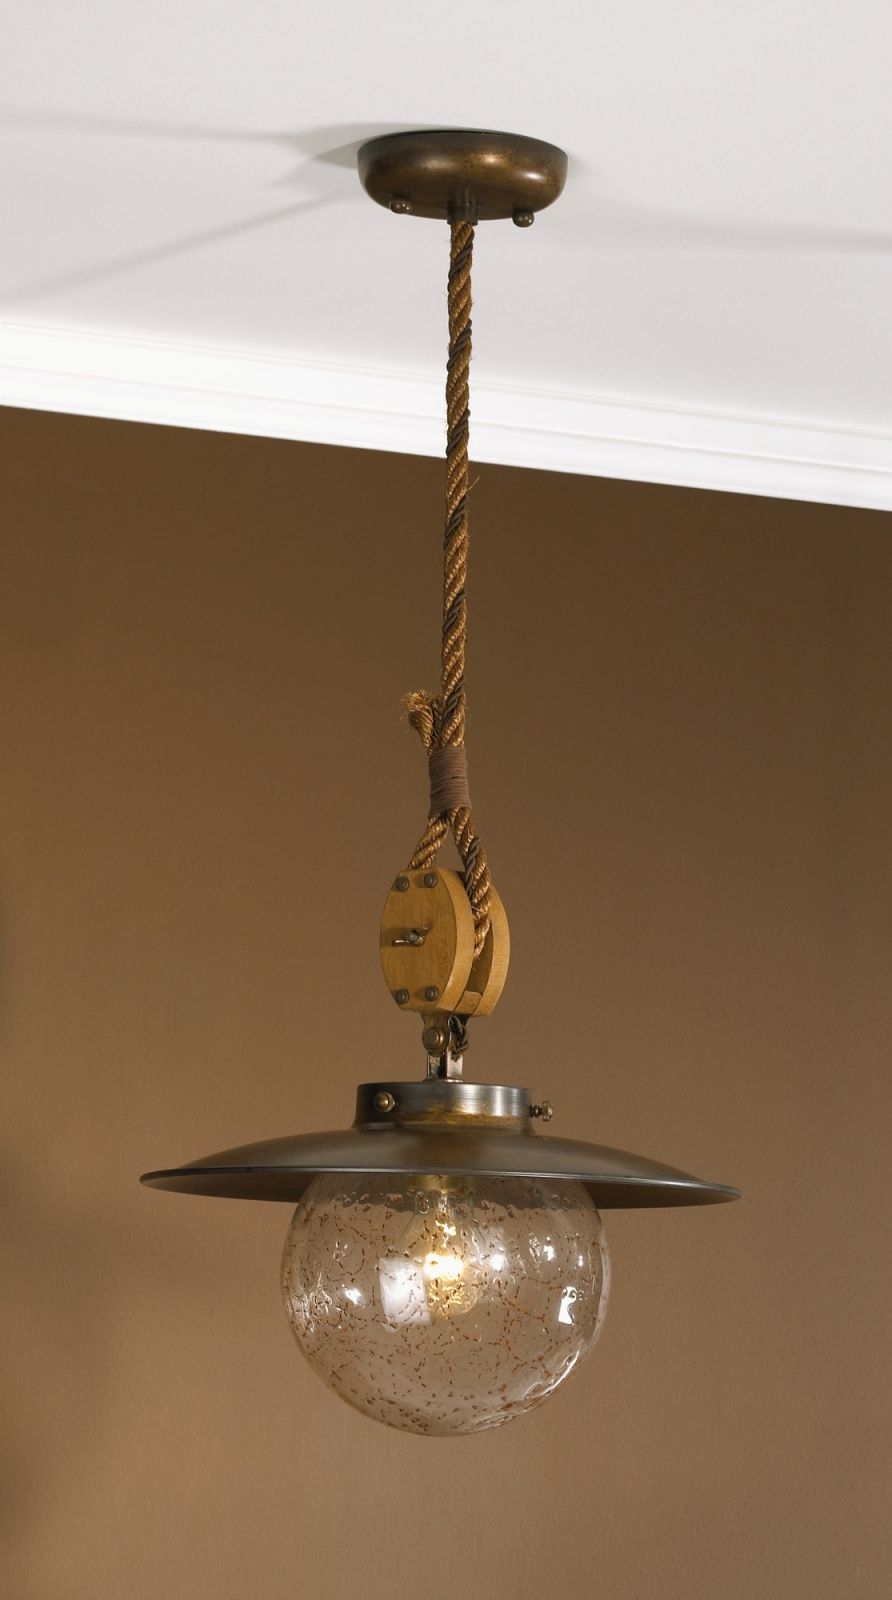 Nautical Style Ceiling Light Fixtures